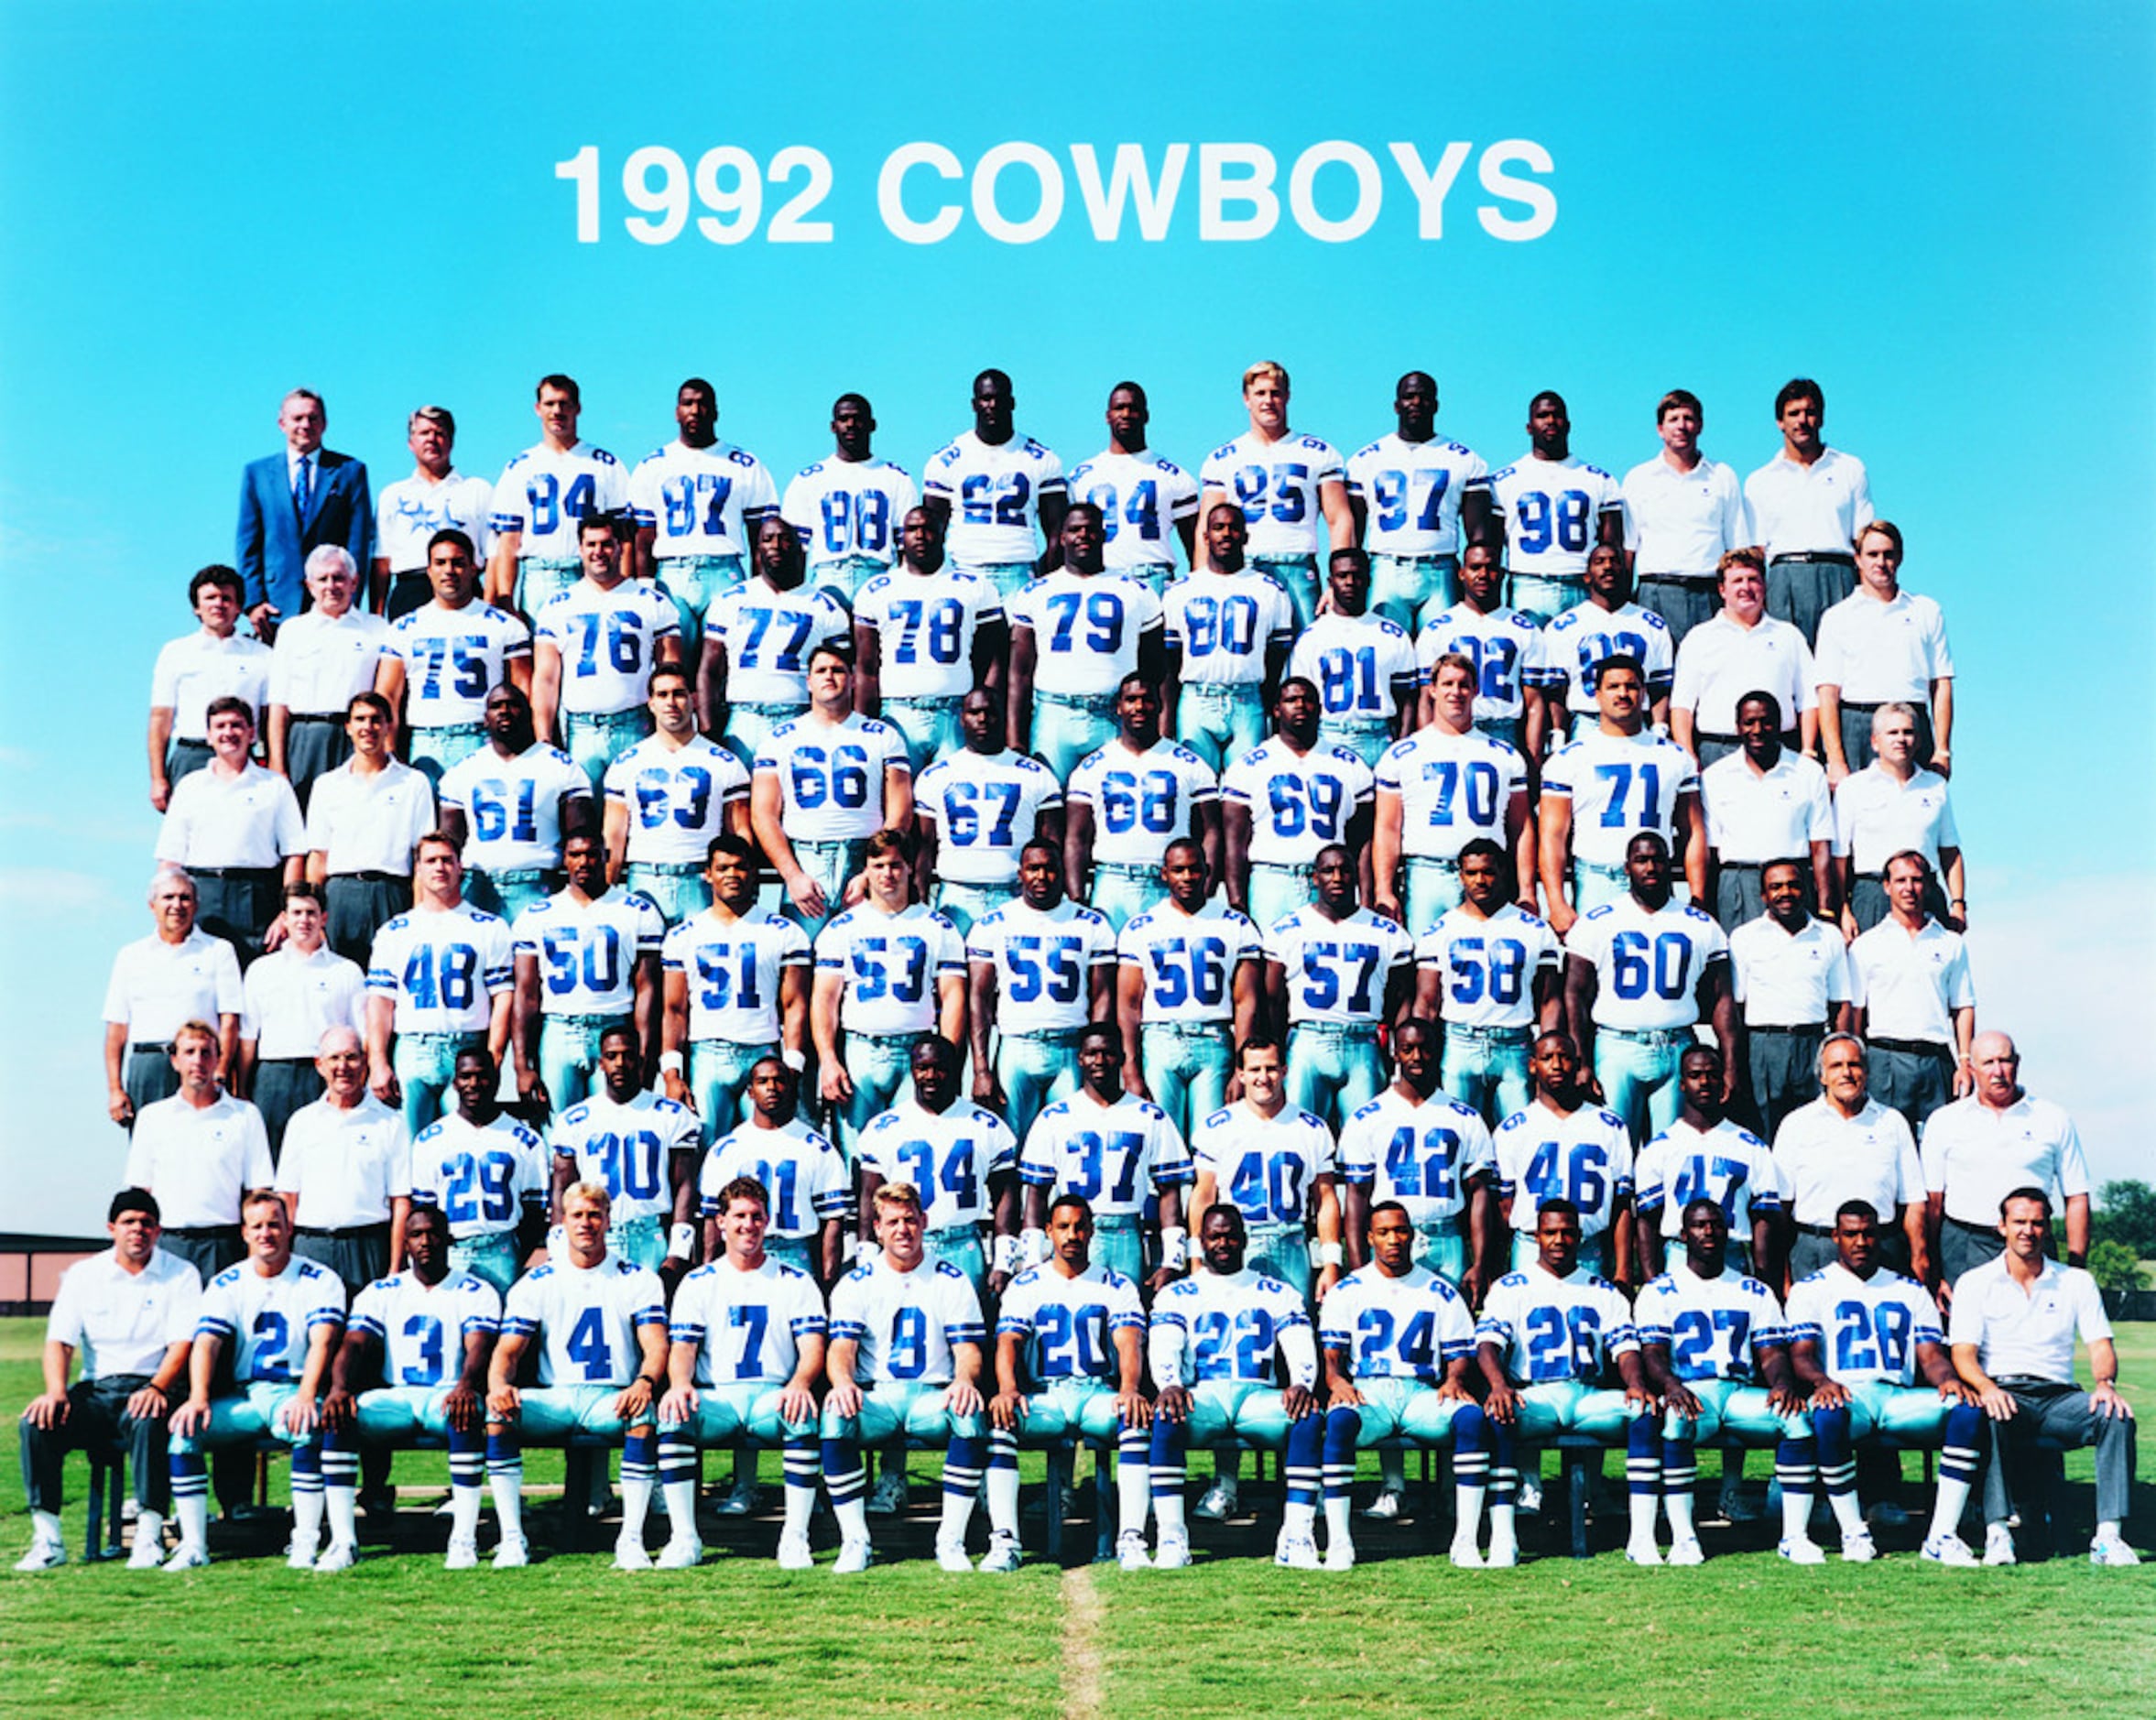 Rancher, roofer, pastor: What are the Super Bowl XXVII-champion Cowboys  doing now?